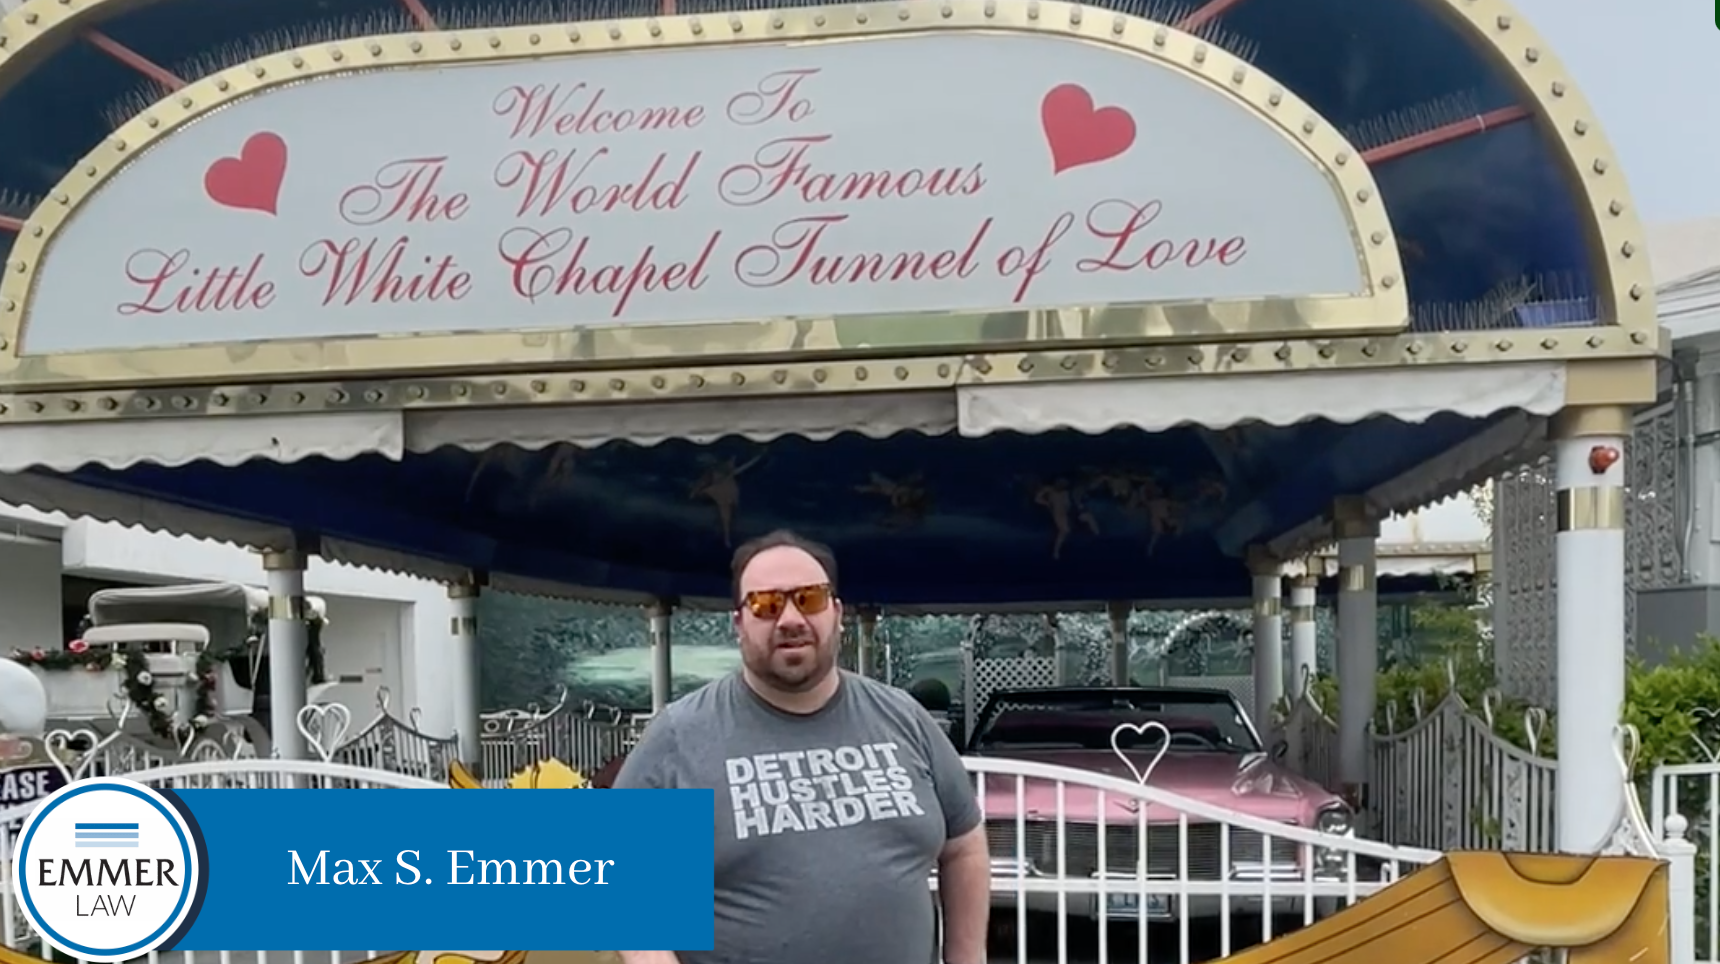 WHAT HAPPENS IF YOU “MISTAKENLY” GET MARRIED IN LAS VEGAS? (LIVE FROM THE WORLD FAMOUS LITTLE WHITE CHAPEL)